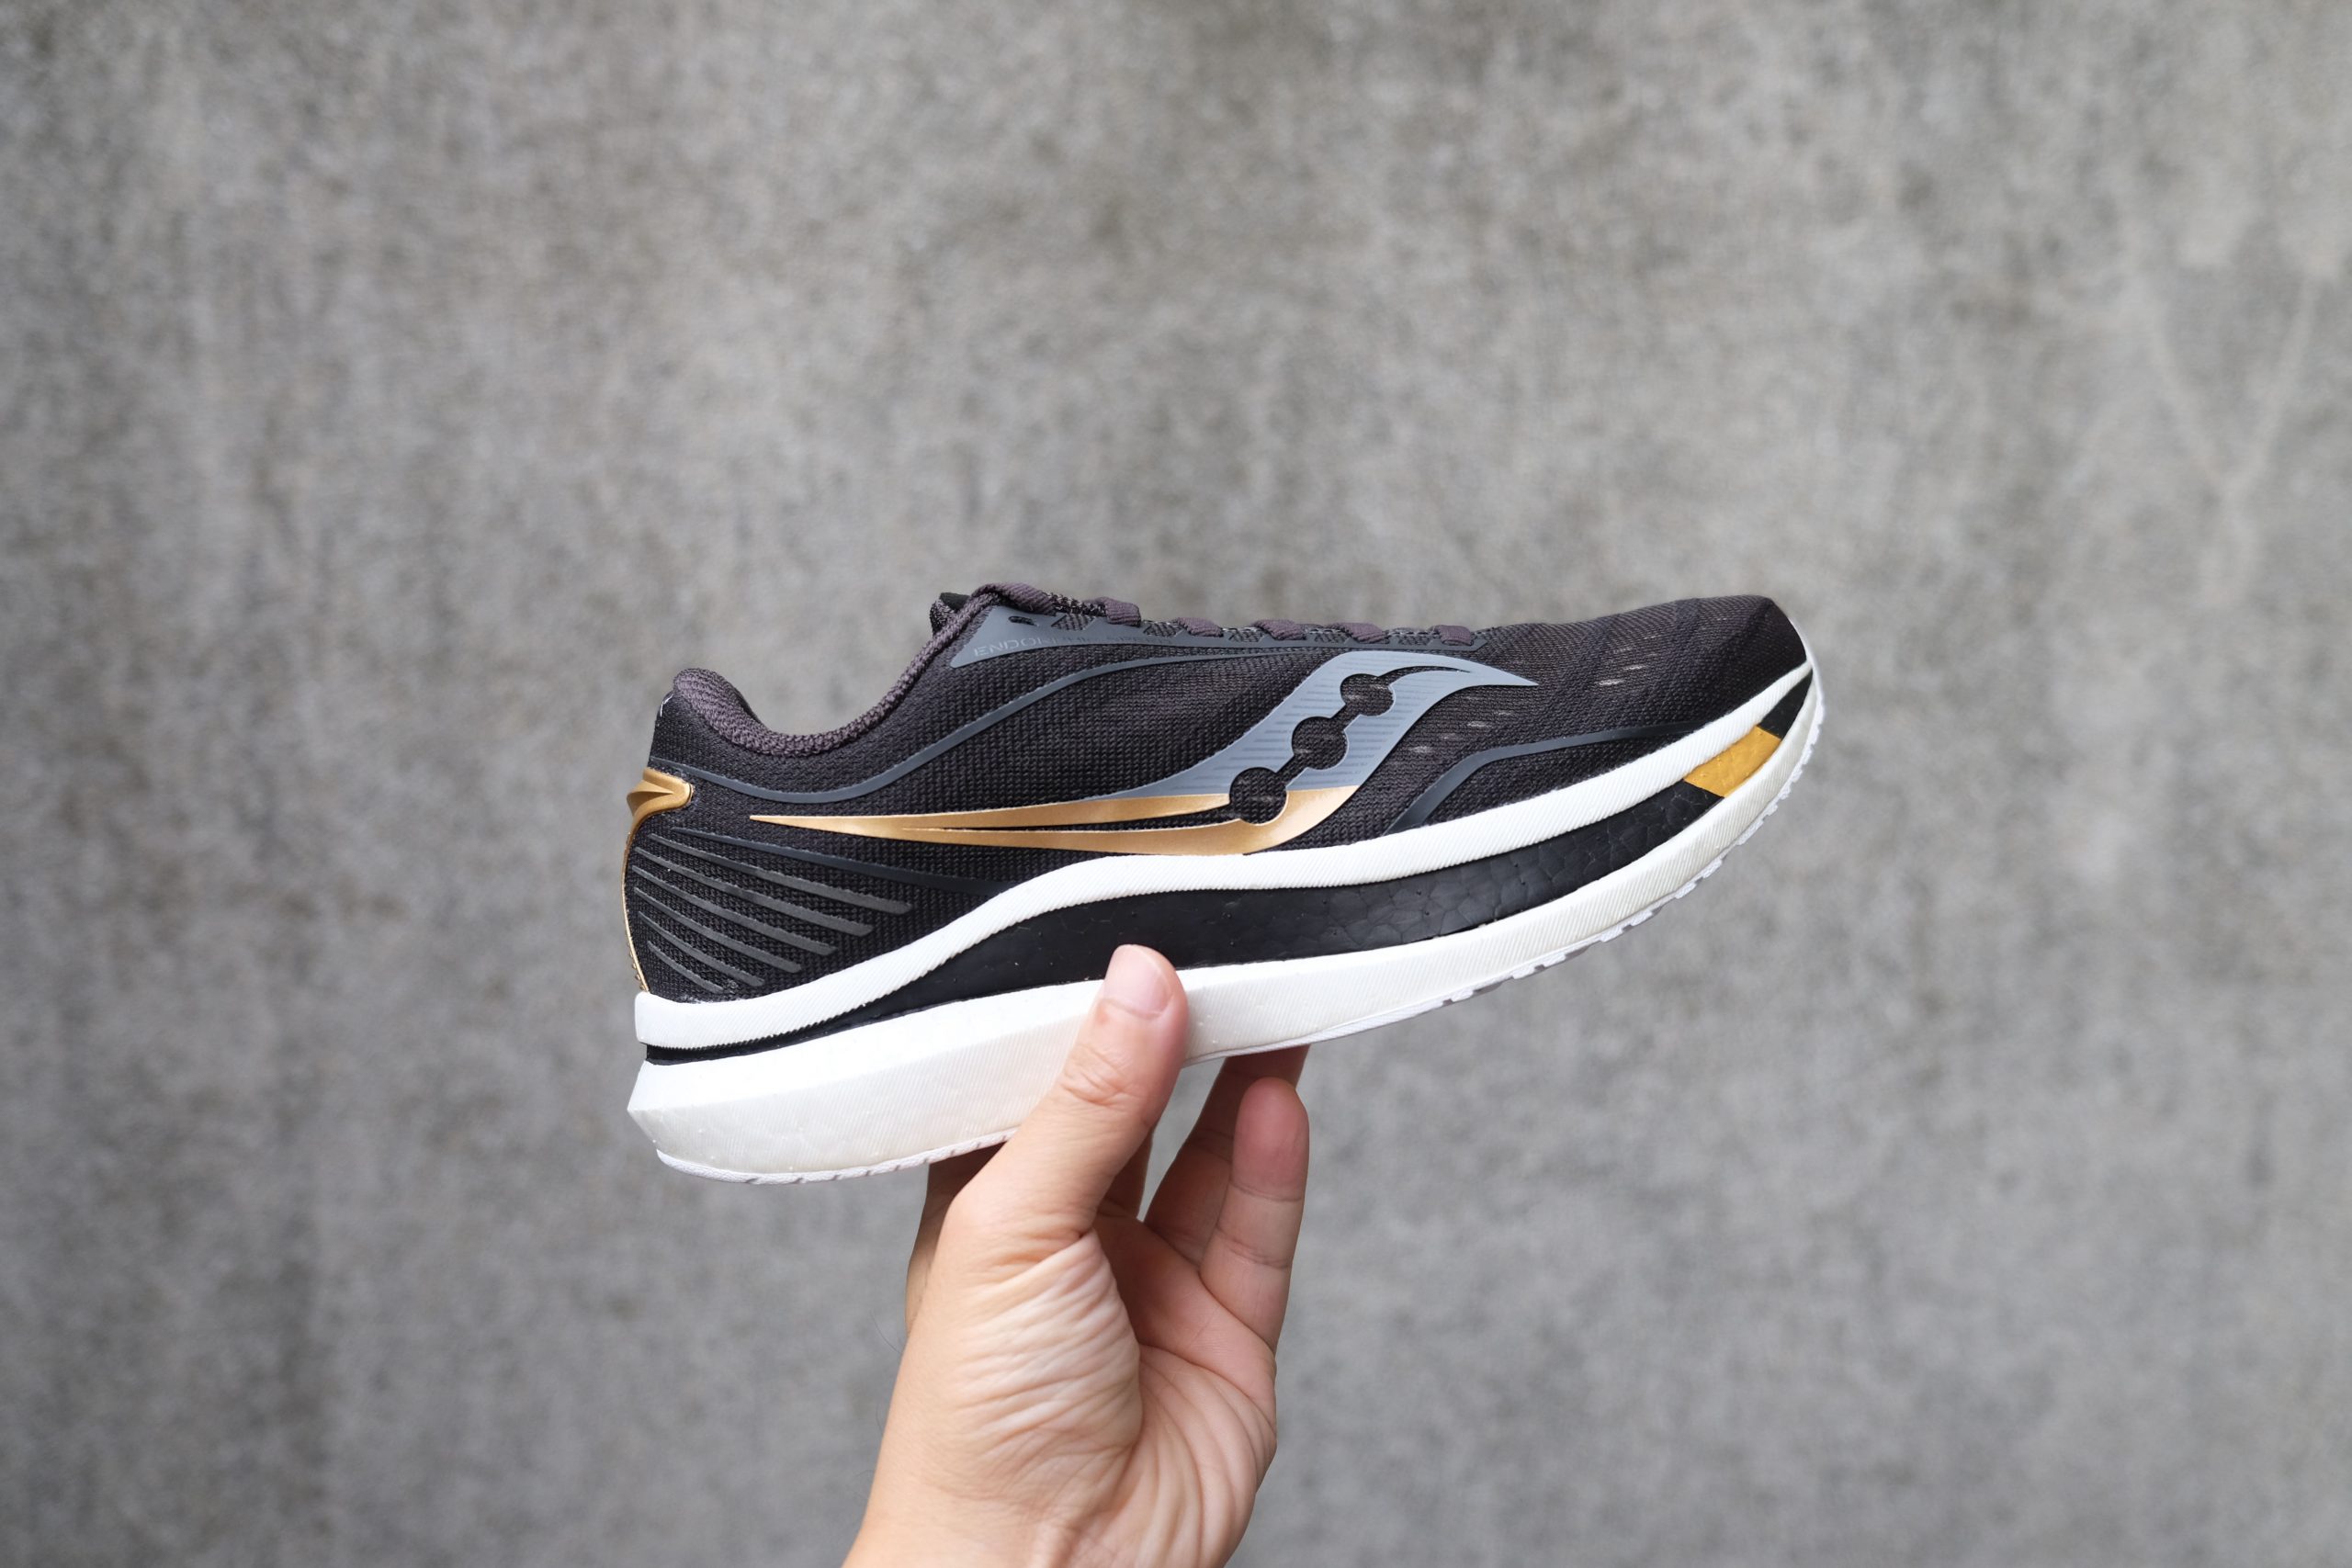 saucony running shoes price philippines